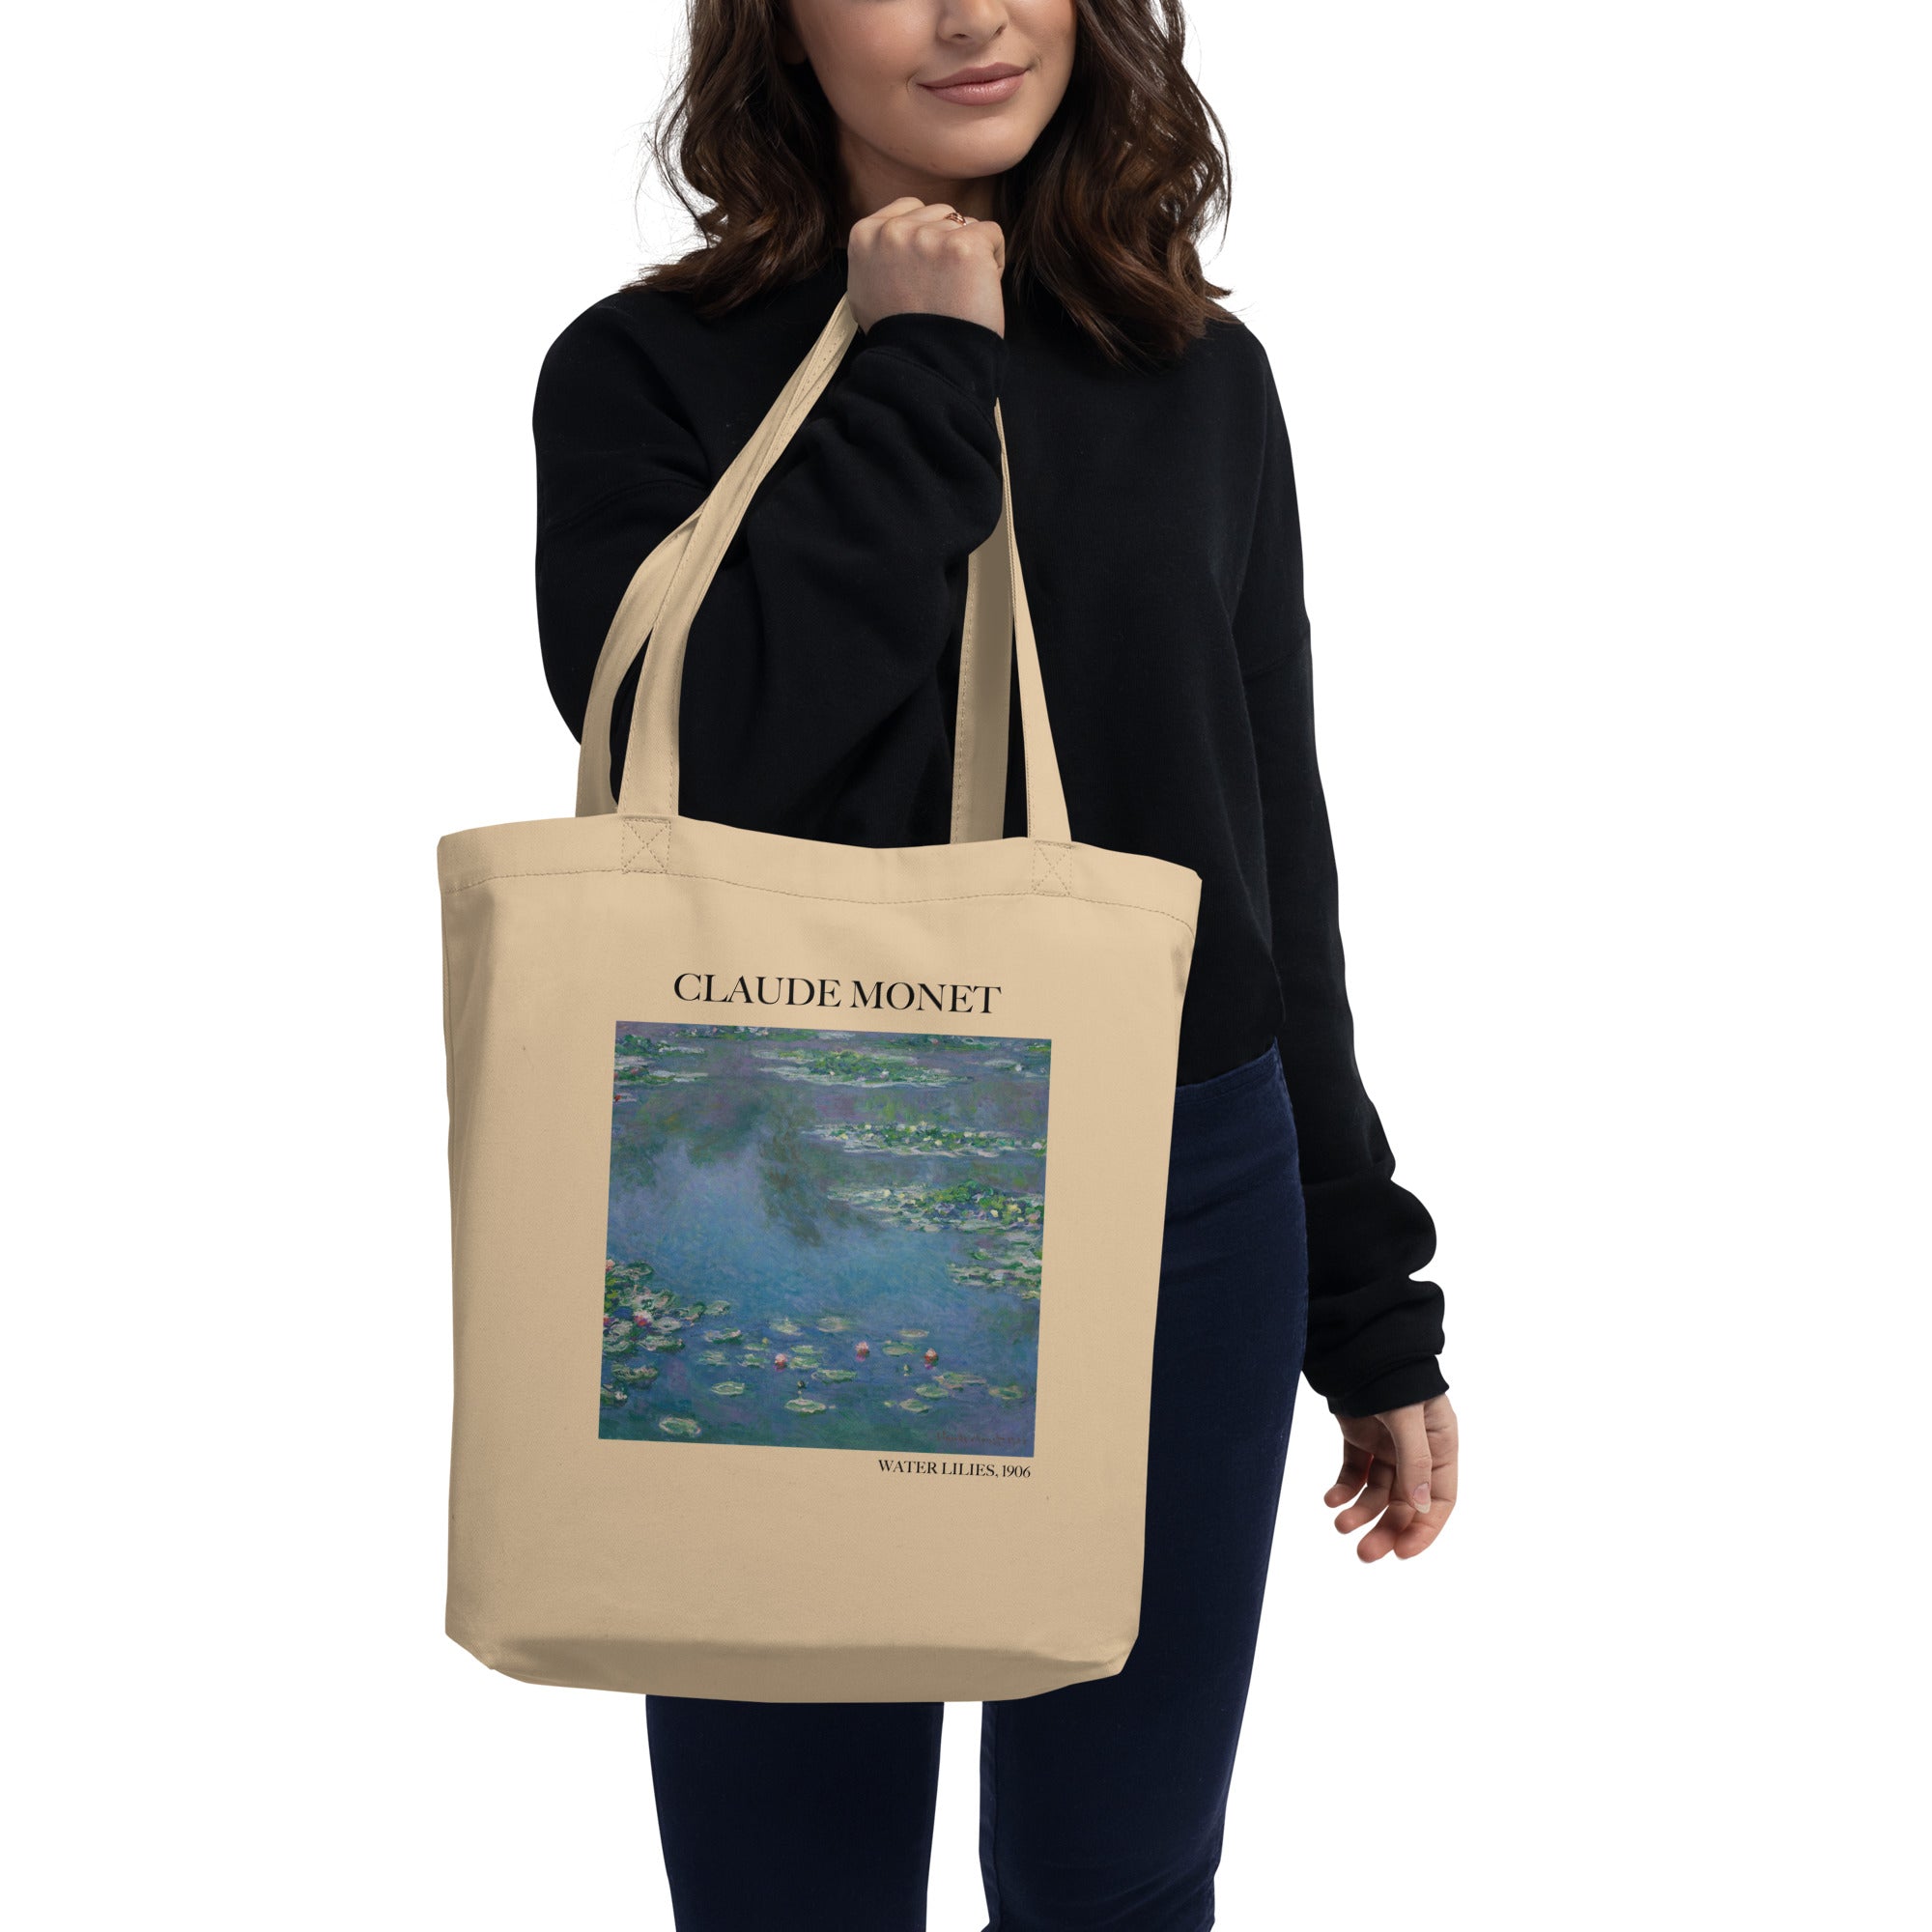 Claude Monet 'Water Lilies' Famous Painting Totebag | Eco Friendly Art Tote Bag